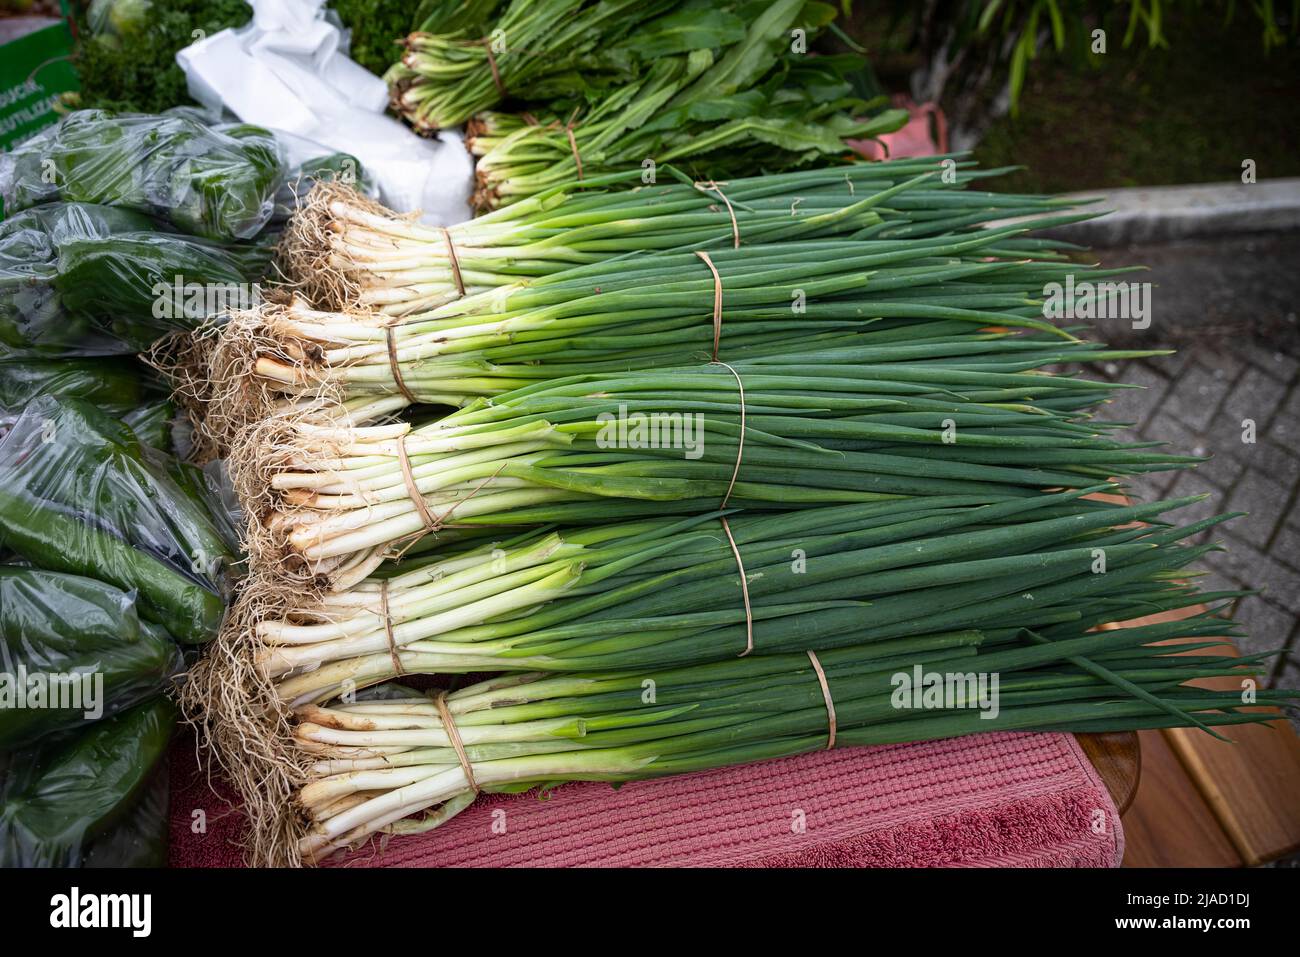 Chives on display at a local country market Stock Photo